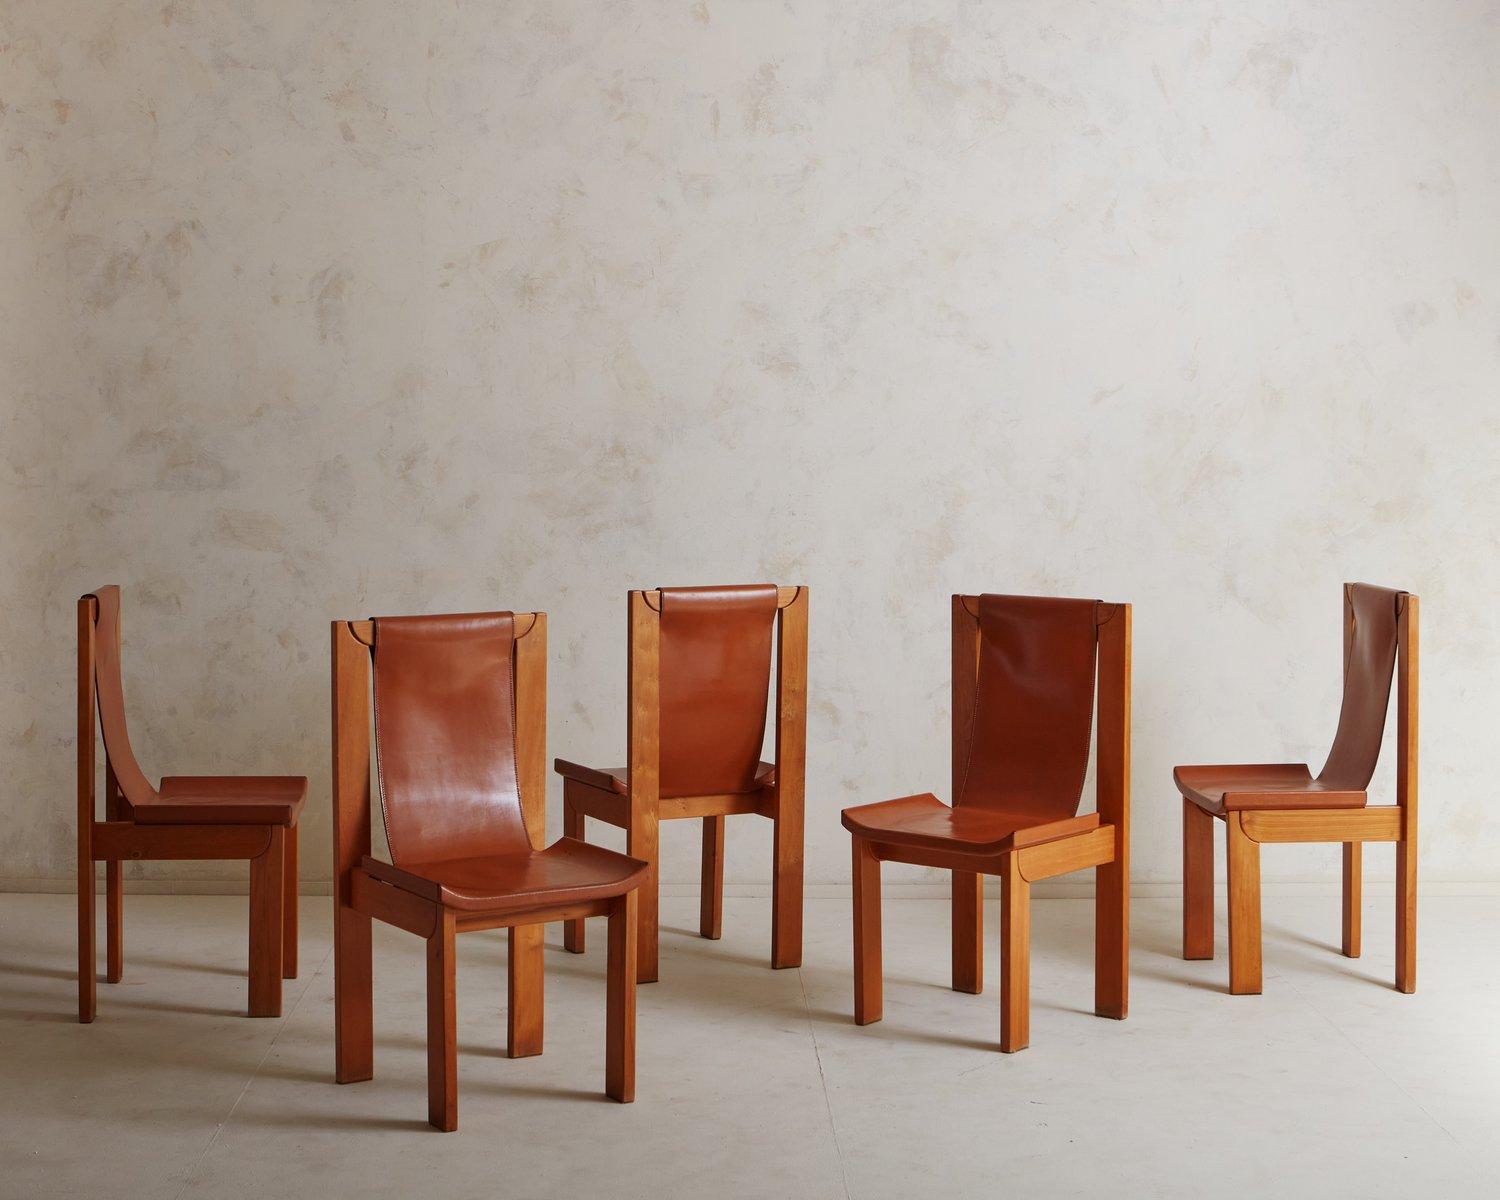 A set of 5 mid -century dining chairs with elegant elm wood frames. These chairs feature patinated cognac leather seats and sling backs with stitch detailing. The seats have subtly curved edges which sit just above the frames. We love the angular